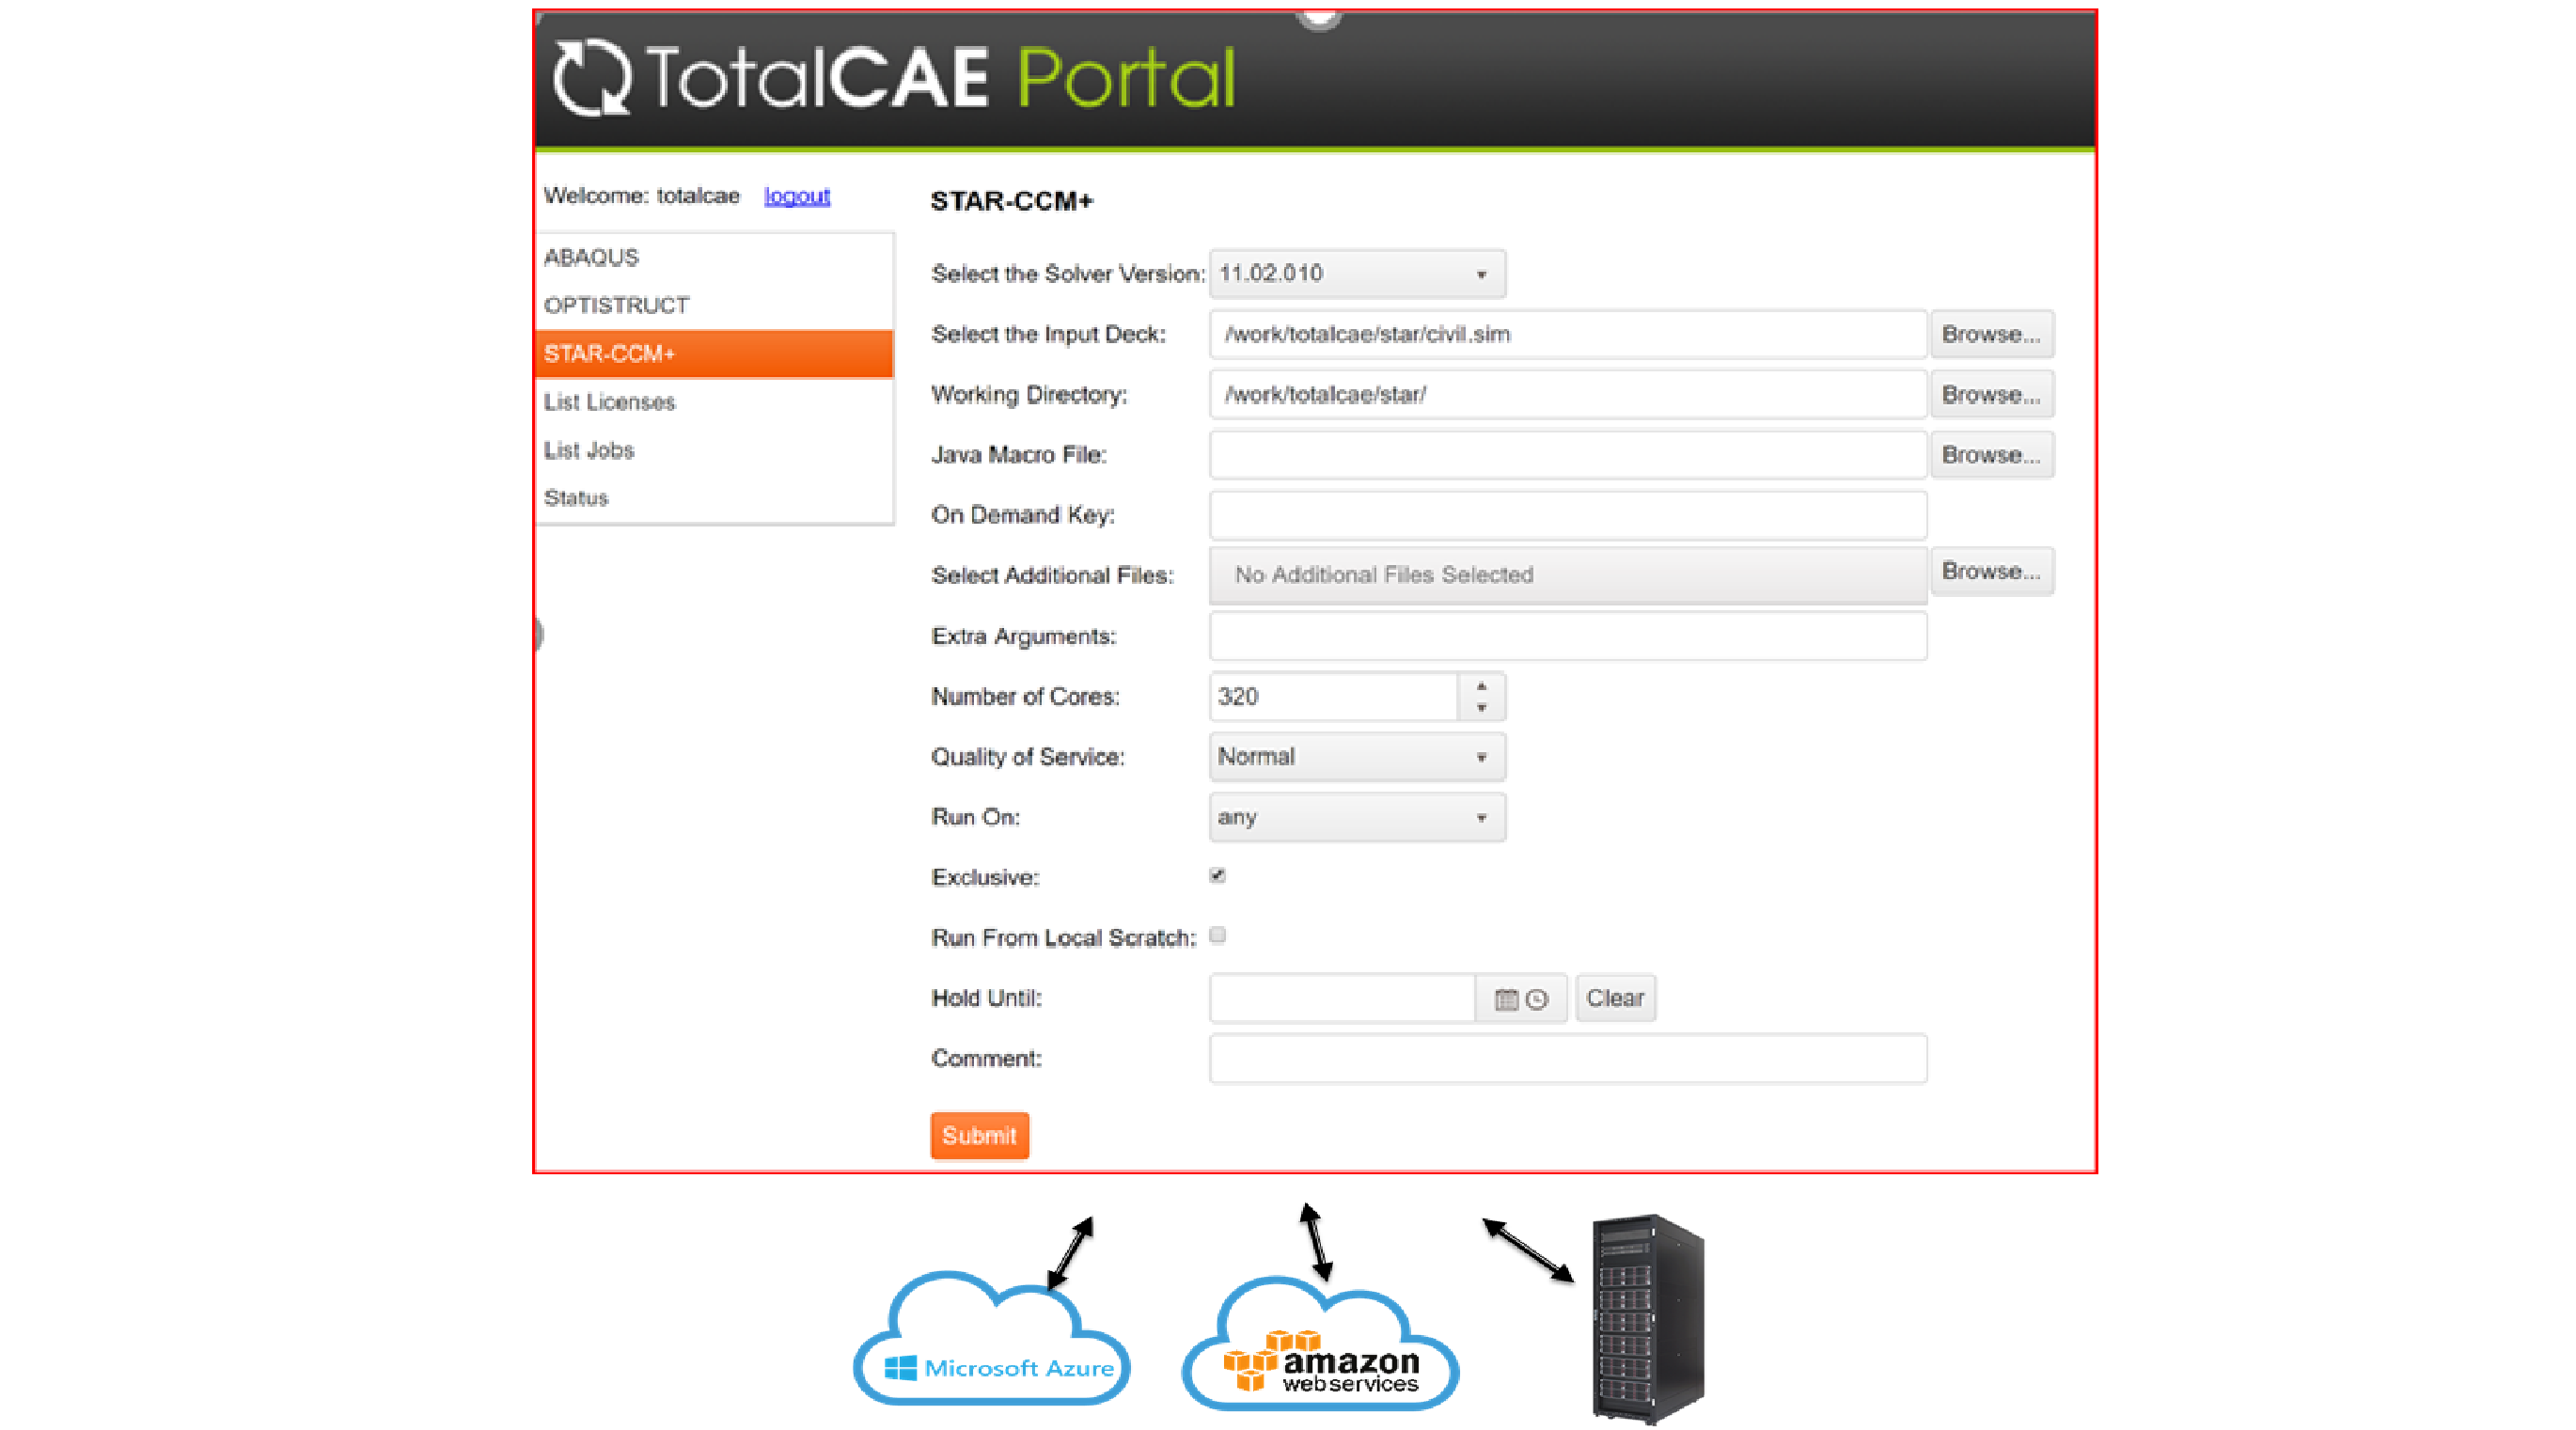 TotalCAE Supports Multiple Public Clouds and On Premise Clouds with a Single Interface